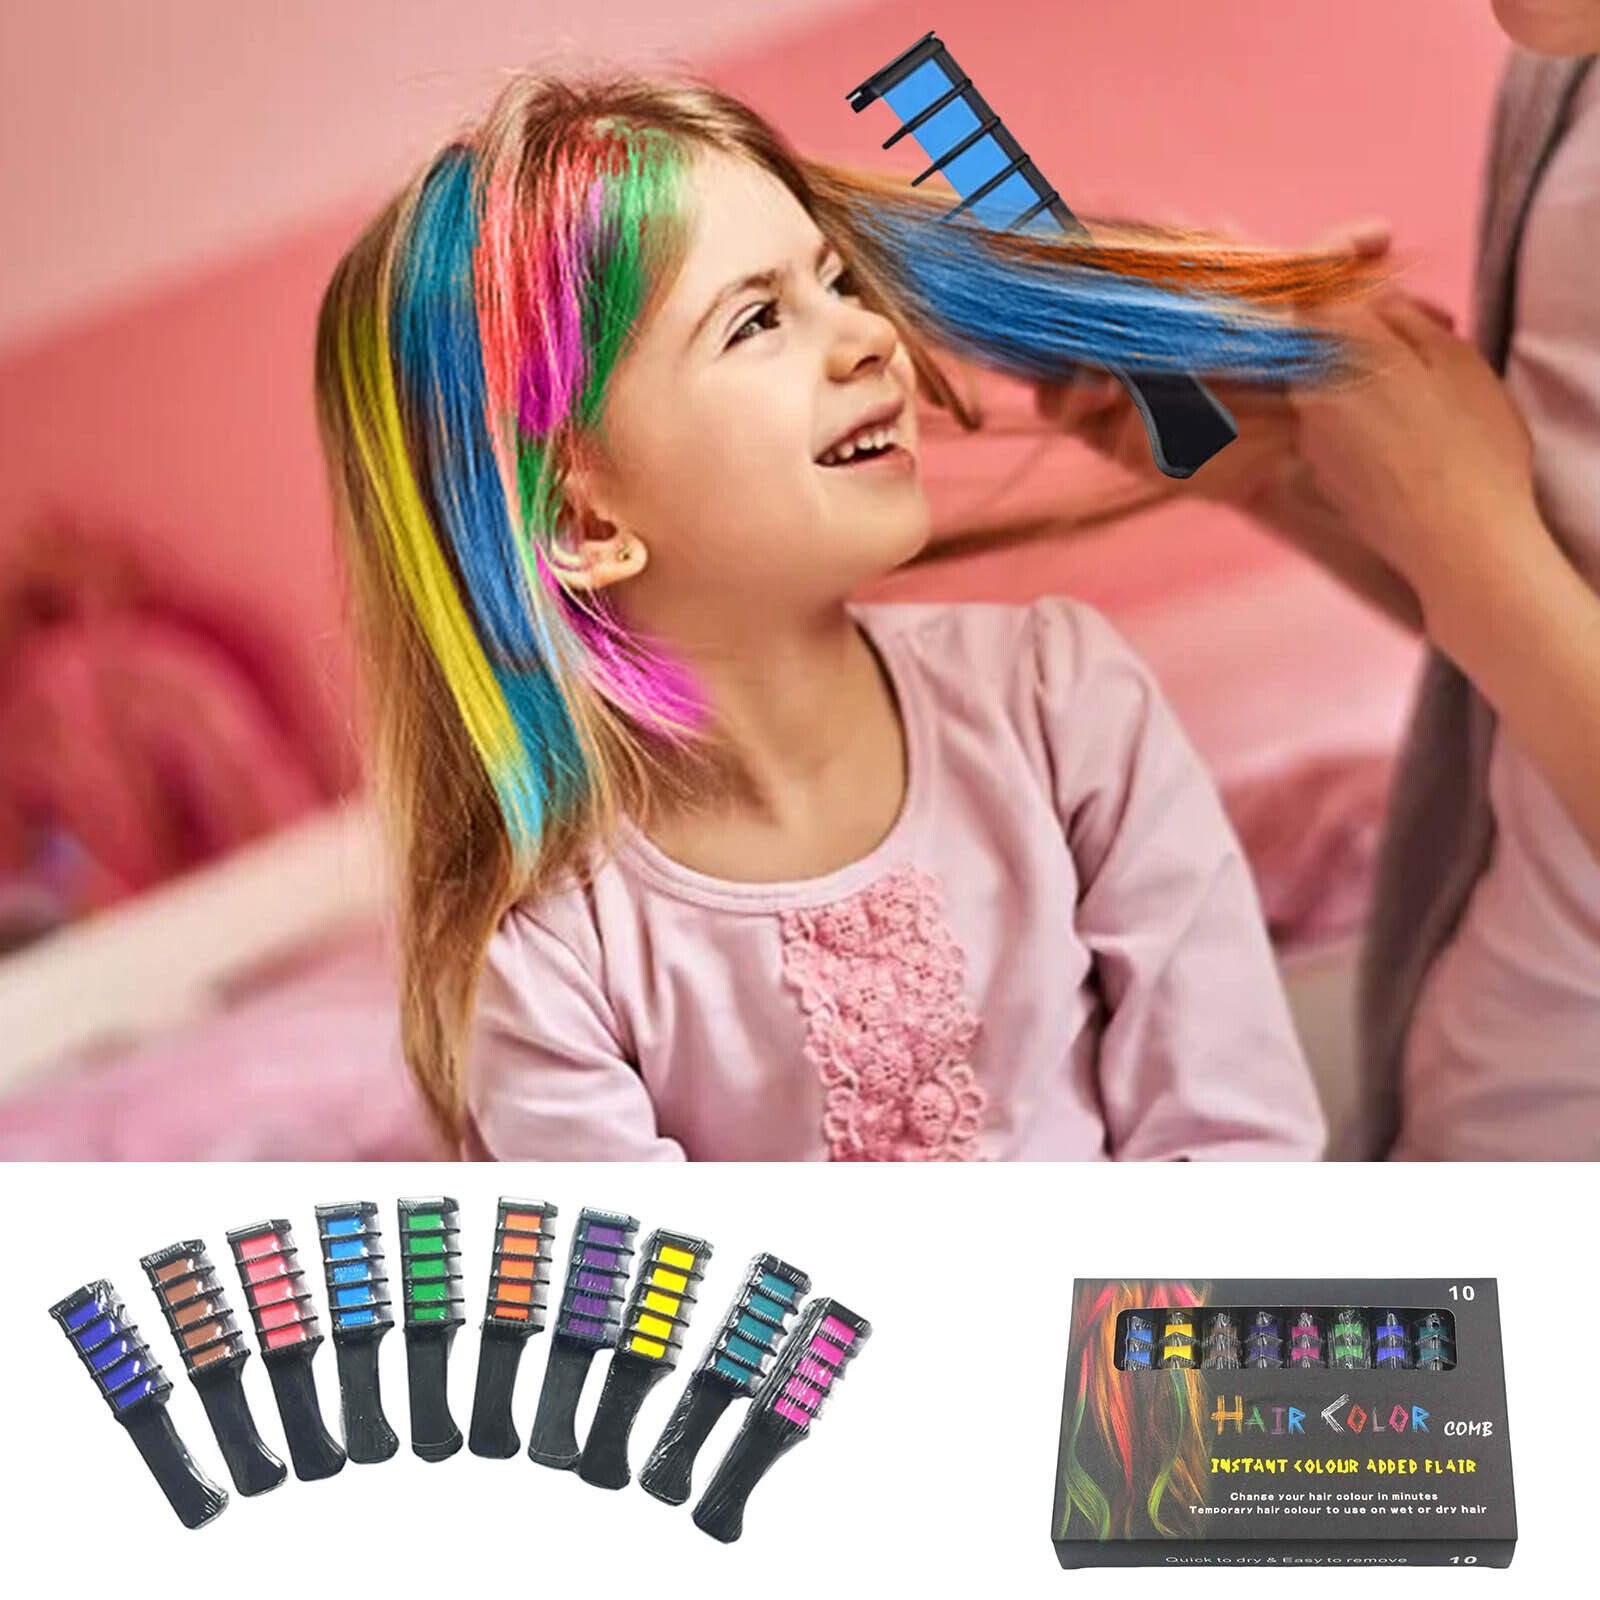 Child's hands applying temporary Hair Chalk for colorful hair.